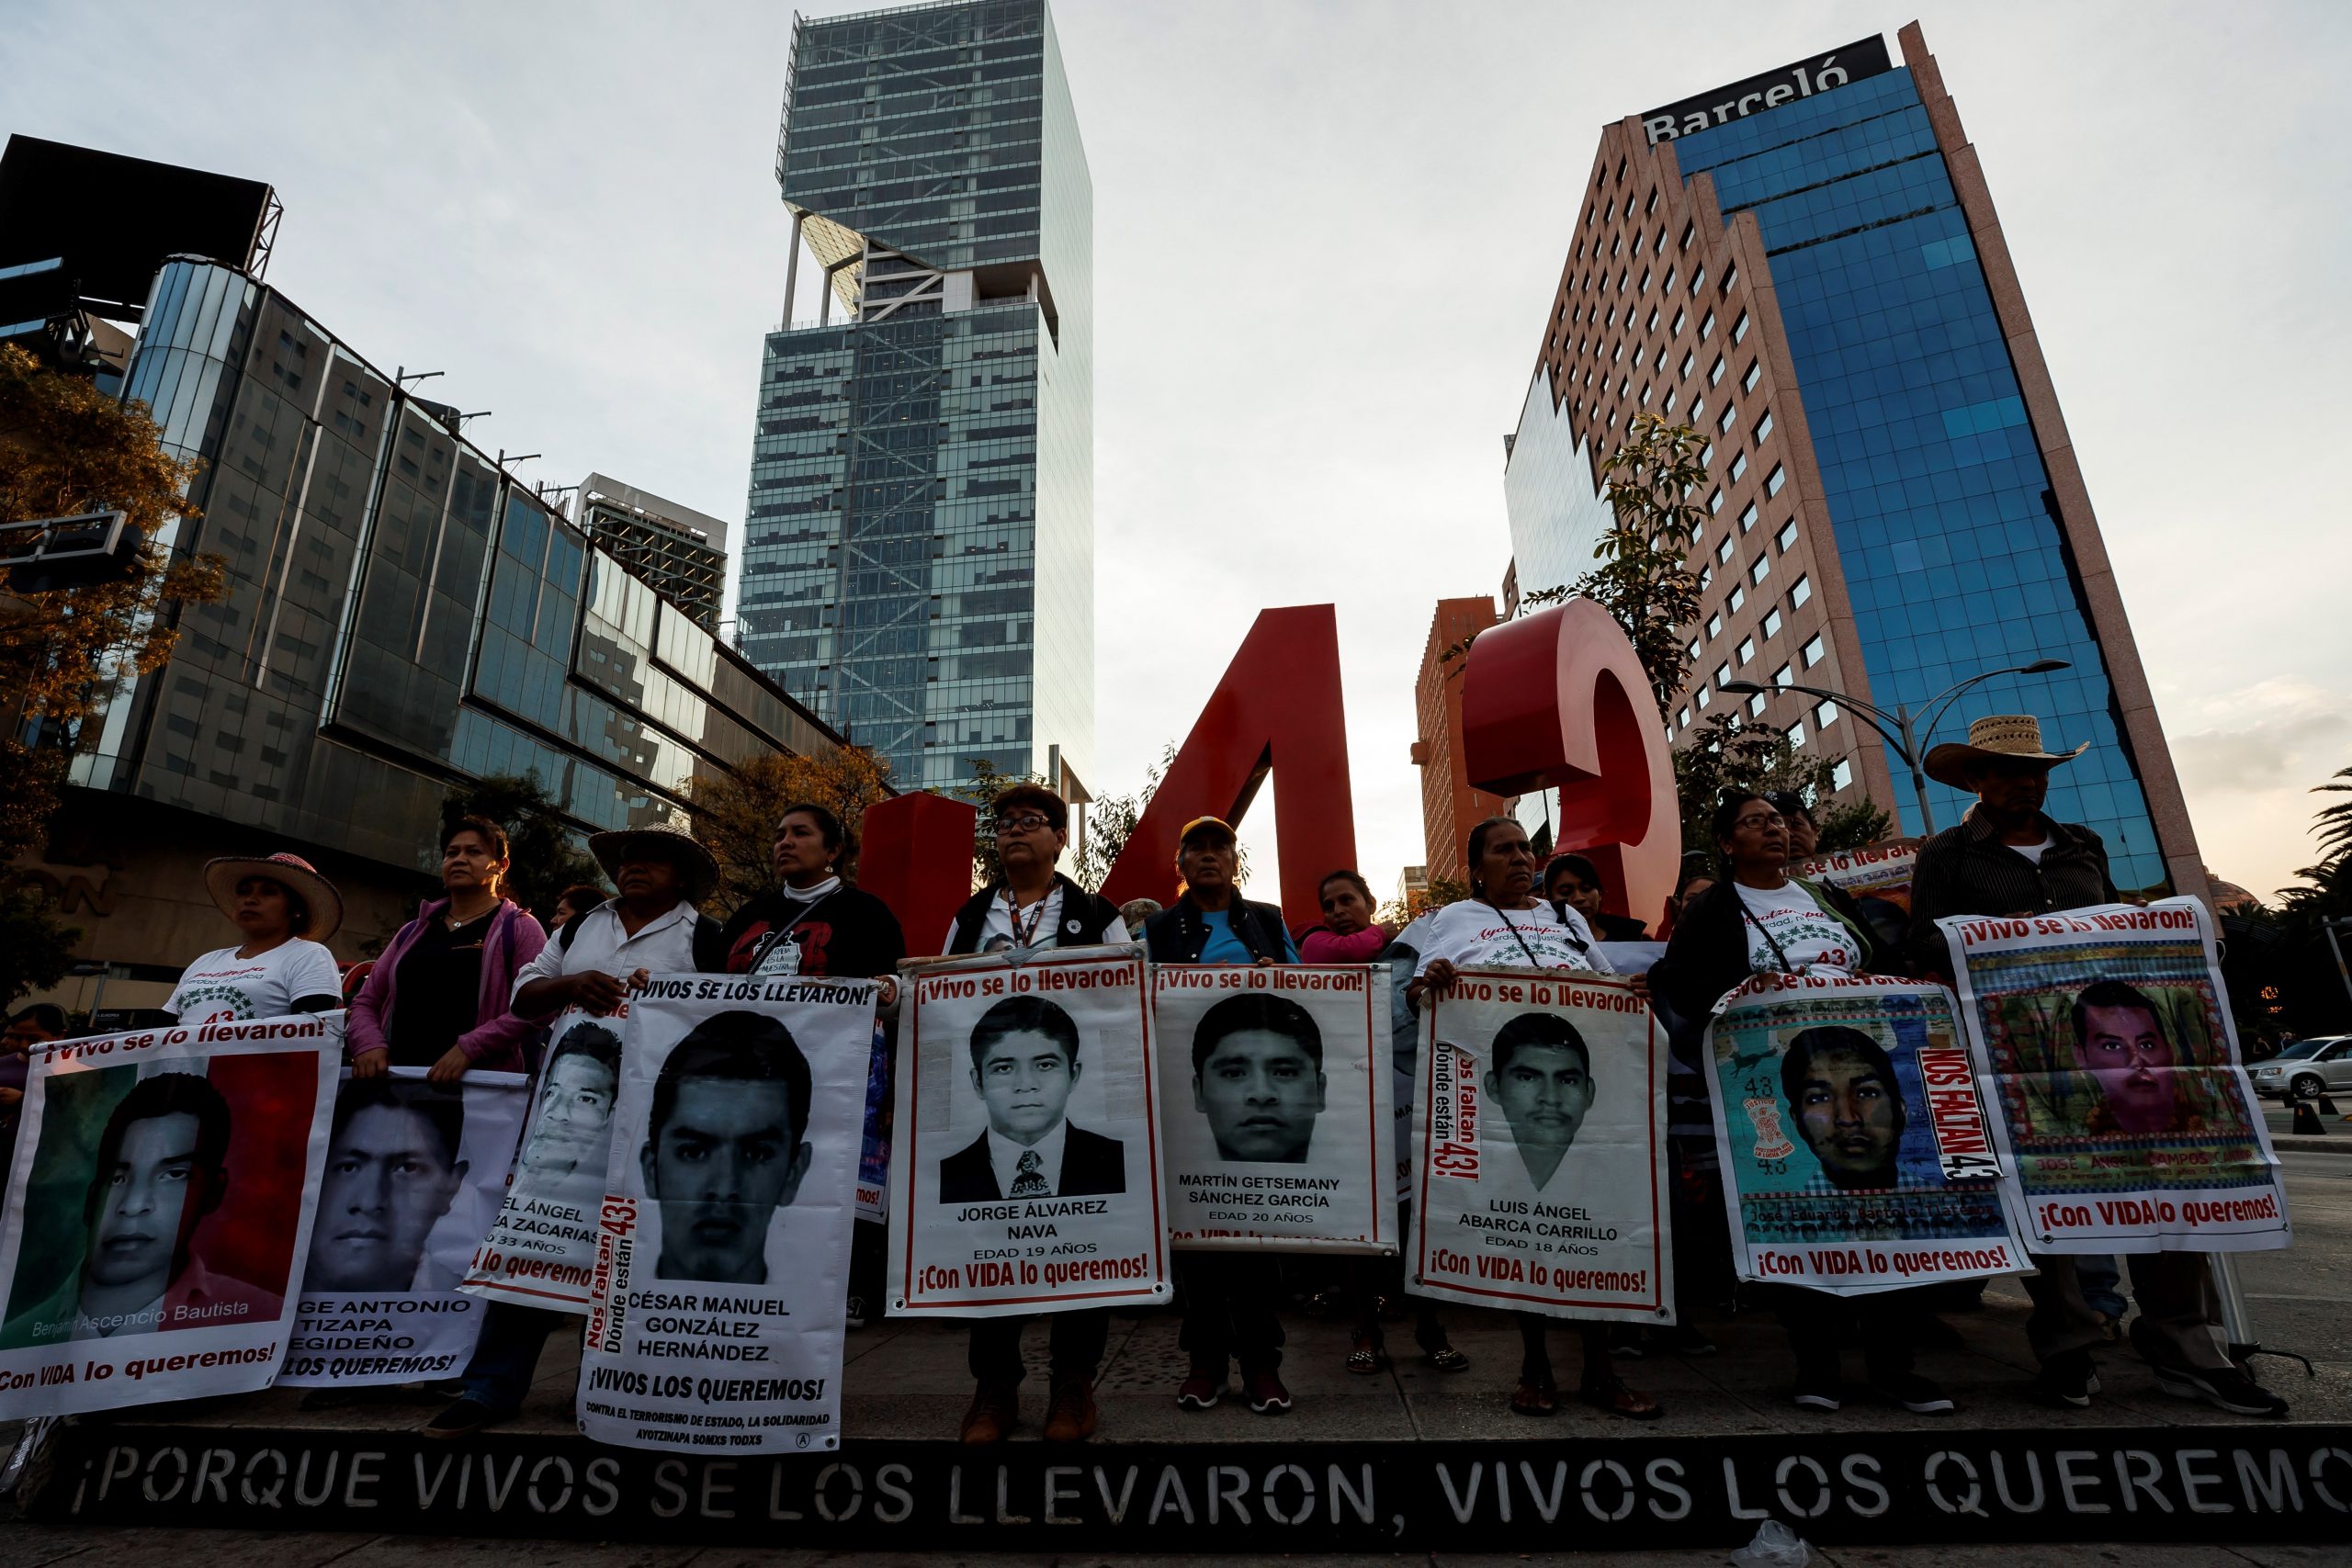 epa08028129 Parents of the 43 missing students from the Ayotzinapa Rural Teacher's College, accompanied by students and members of civil organizations, protest in Mexico City, Mexico, 26 November 2019. The protest comes on the eve of the fifth anniversary of the dissapearance of the students, who were allegedly detained by police and handed over to drug cartel gunmen, in the municipality of Iguala in the southern state of Guerrero.  EPA/JOSE MENDEZ